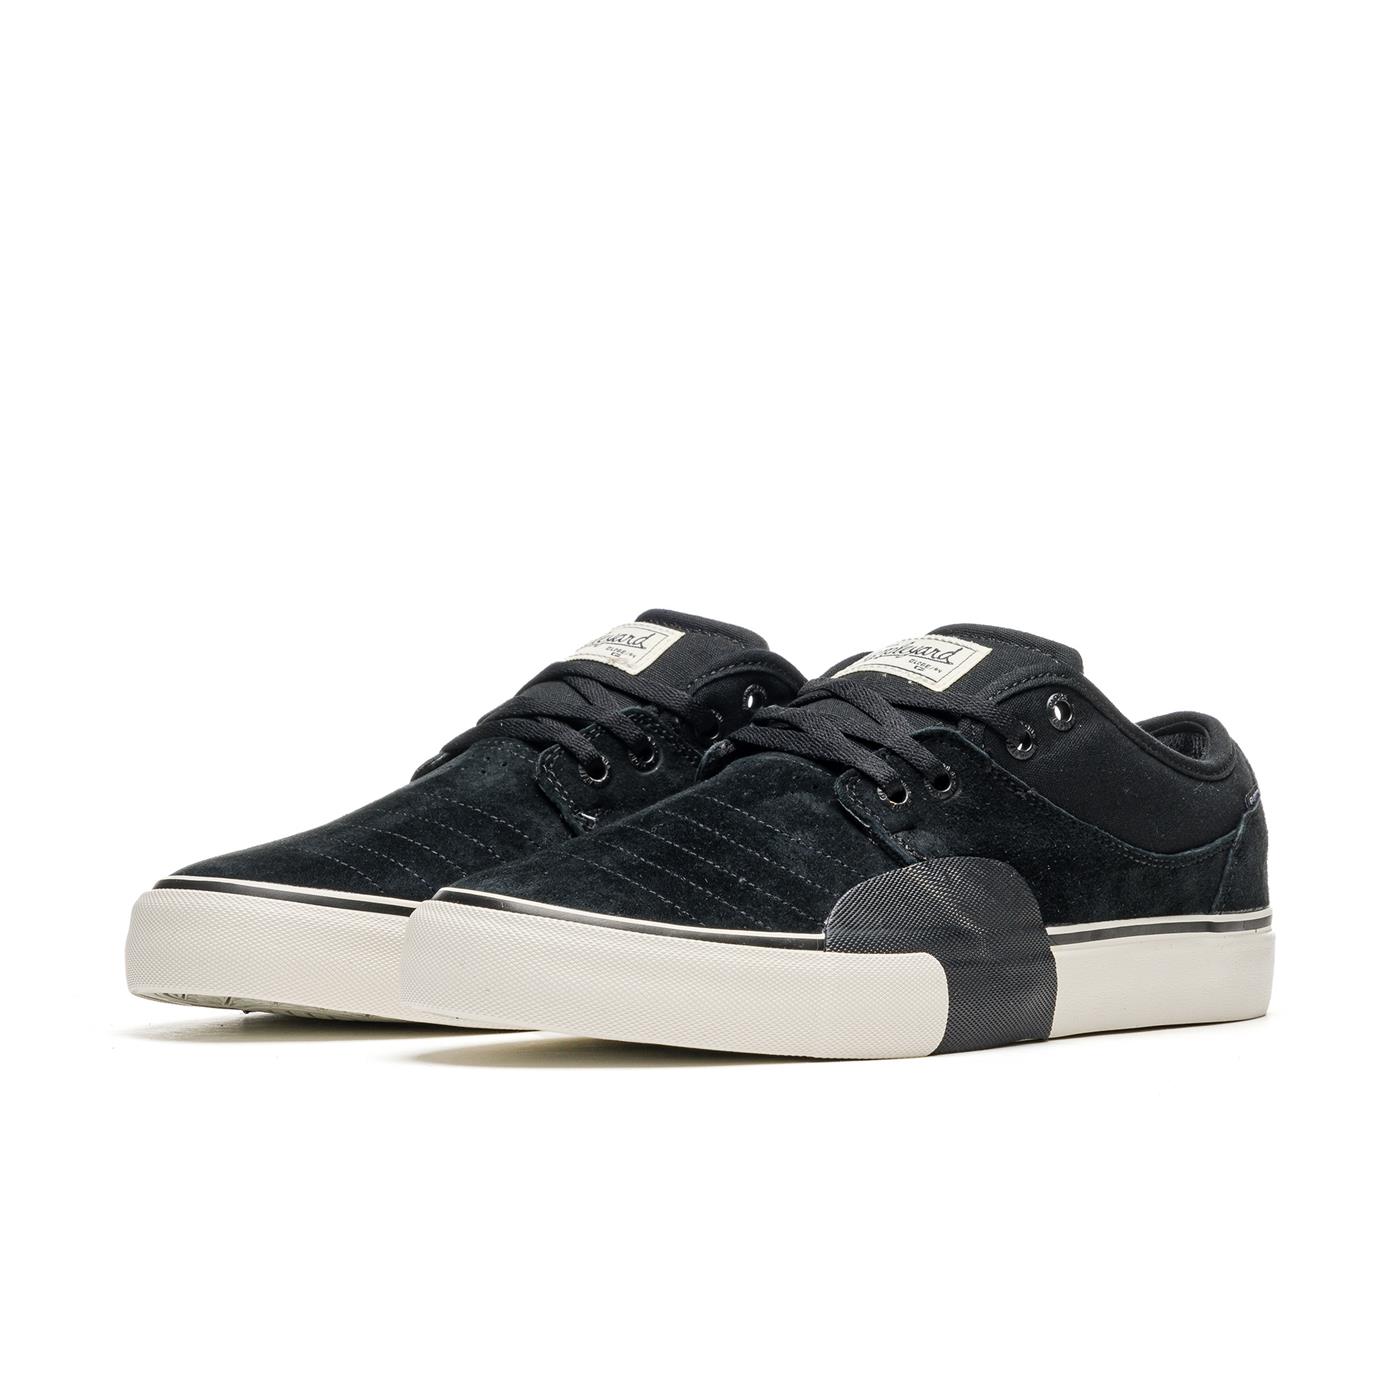 Sneakers GLOBE Mahalo Plus Black for Man | GBMAHALOP-10892 | XTREME.PT